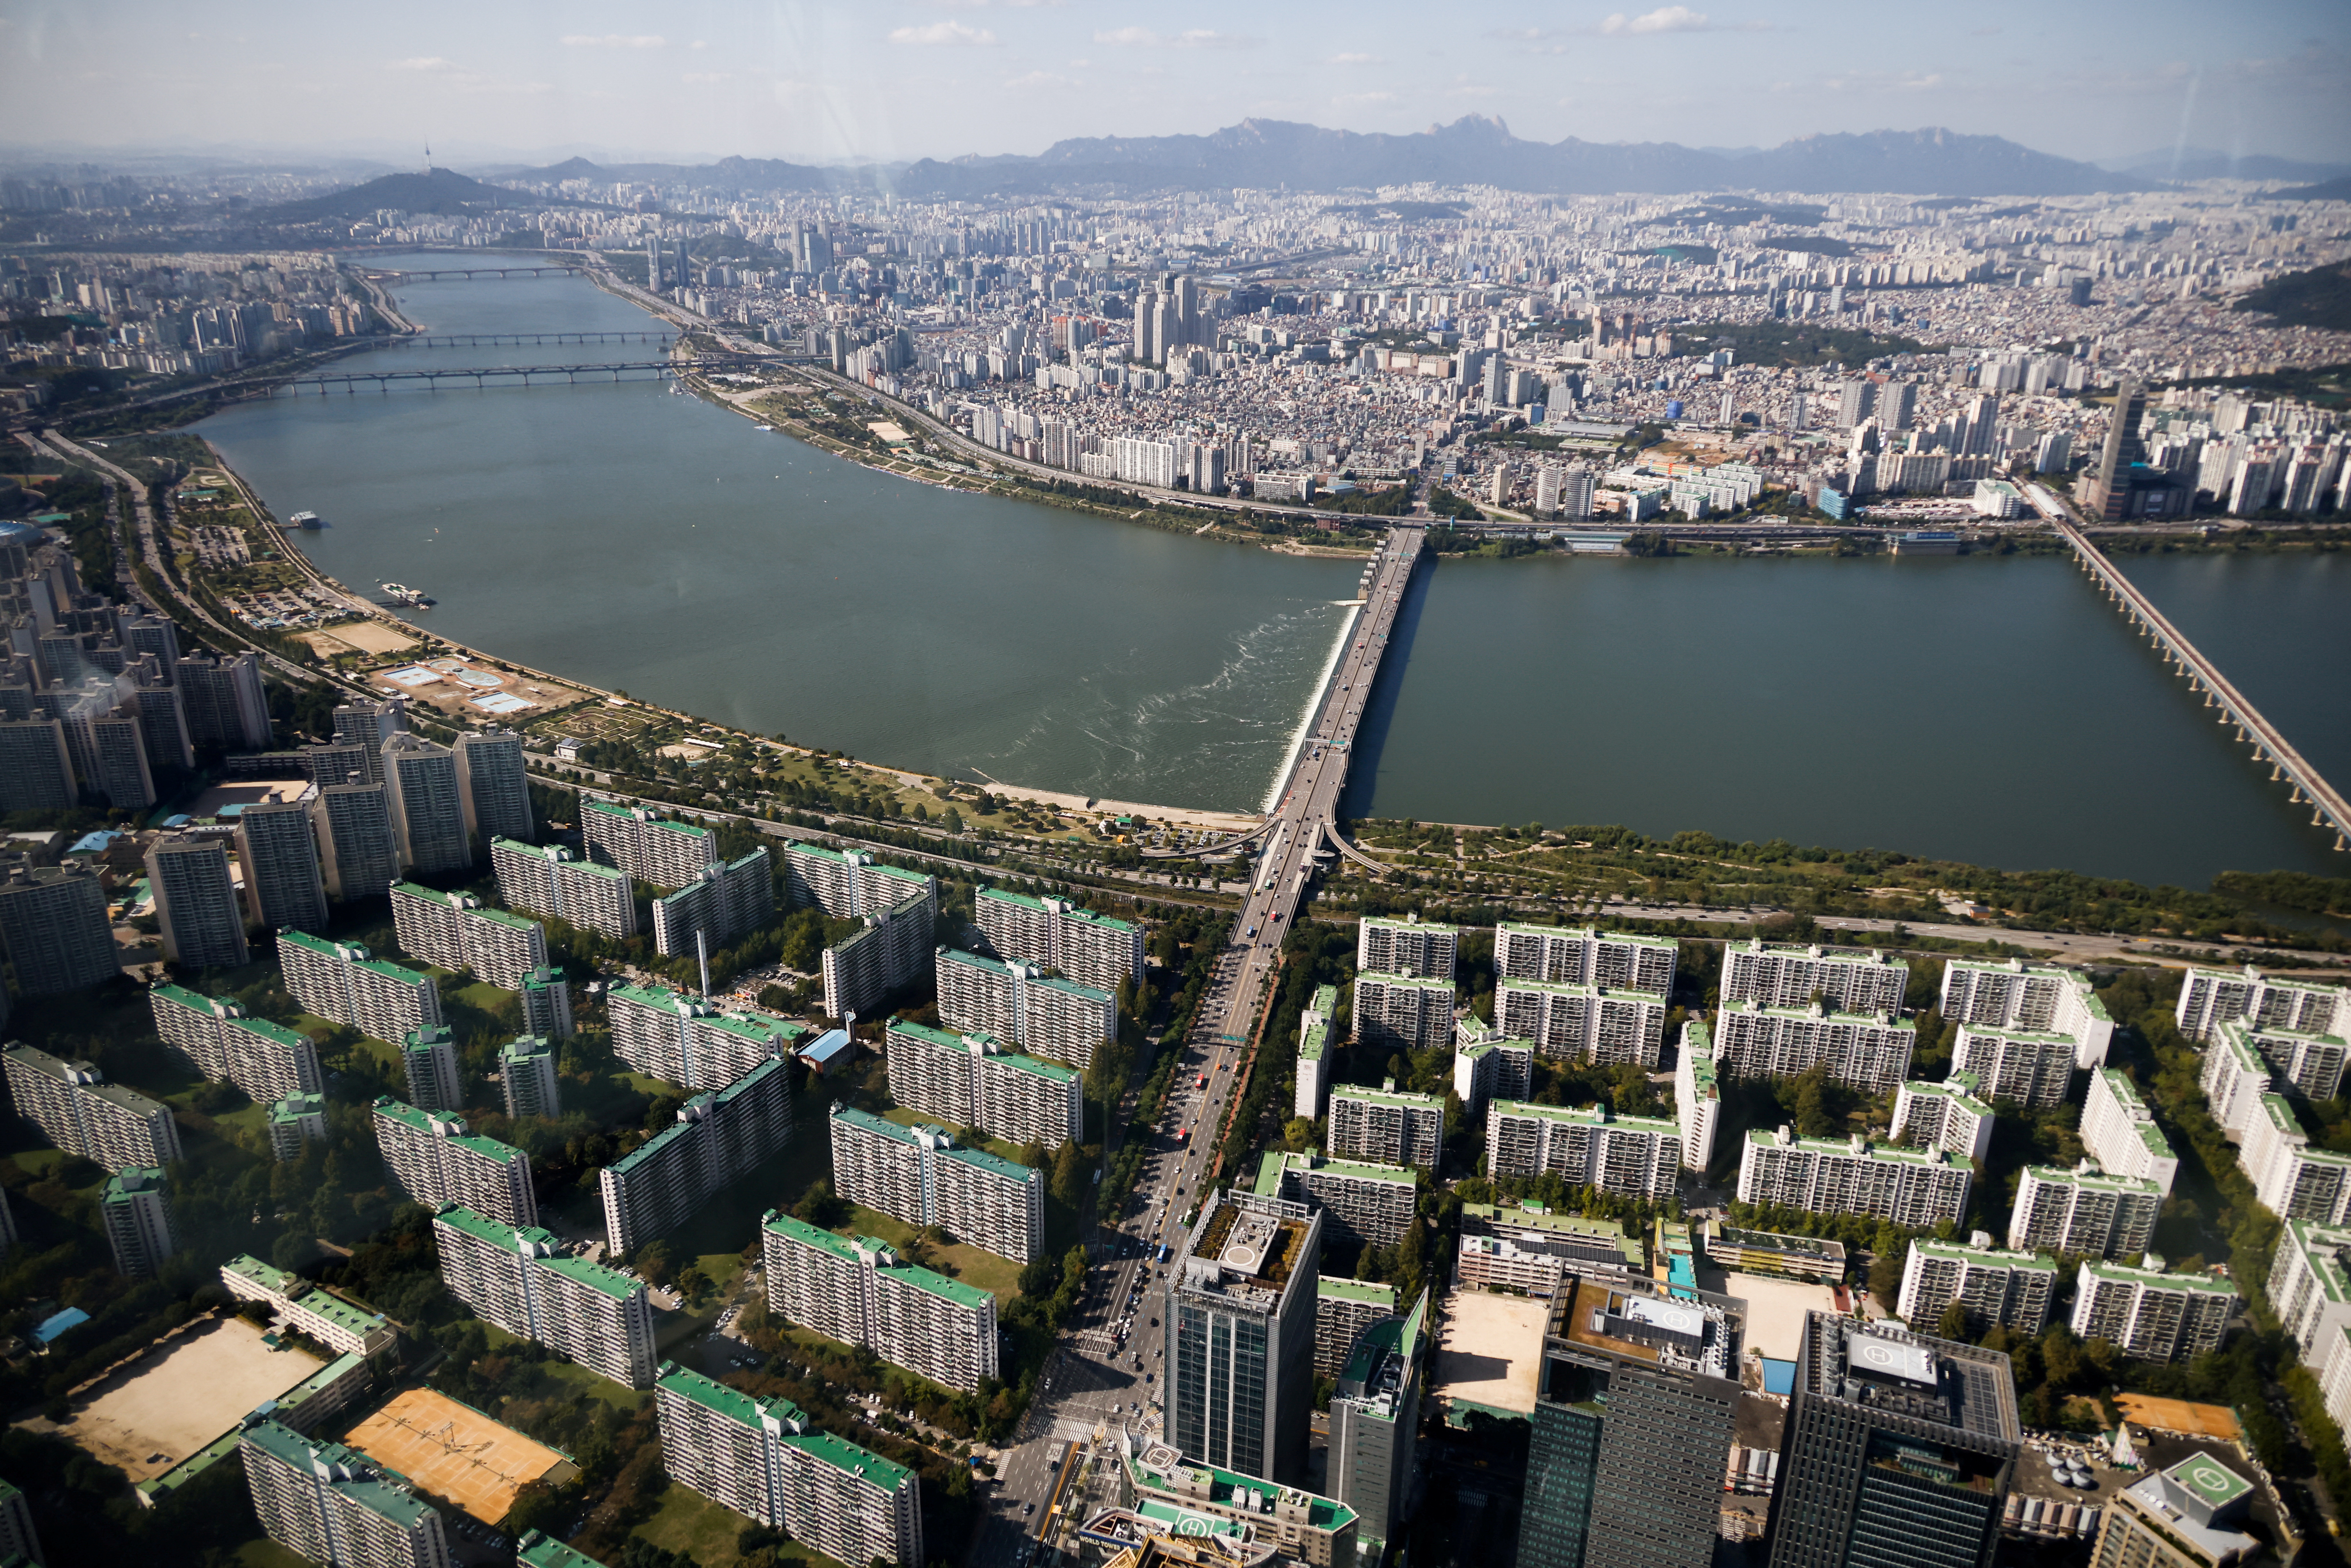 apartment complexes in Seoul